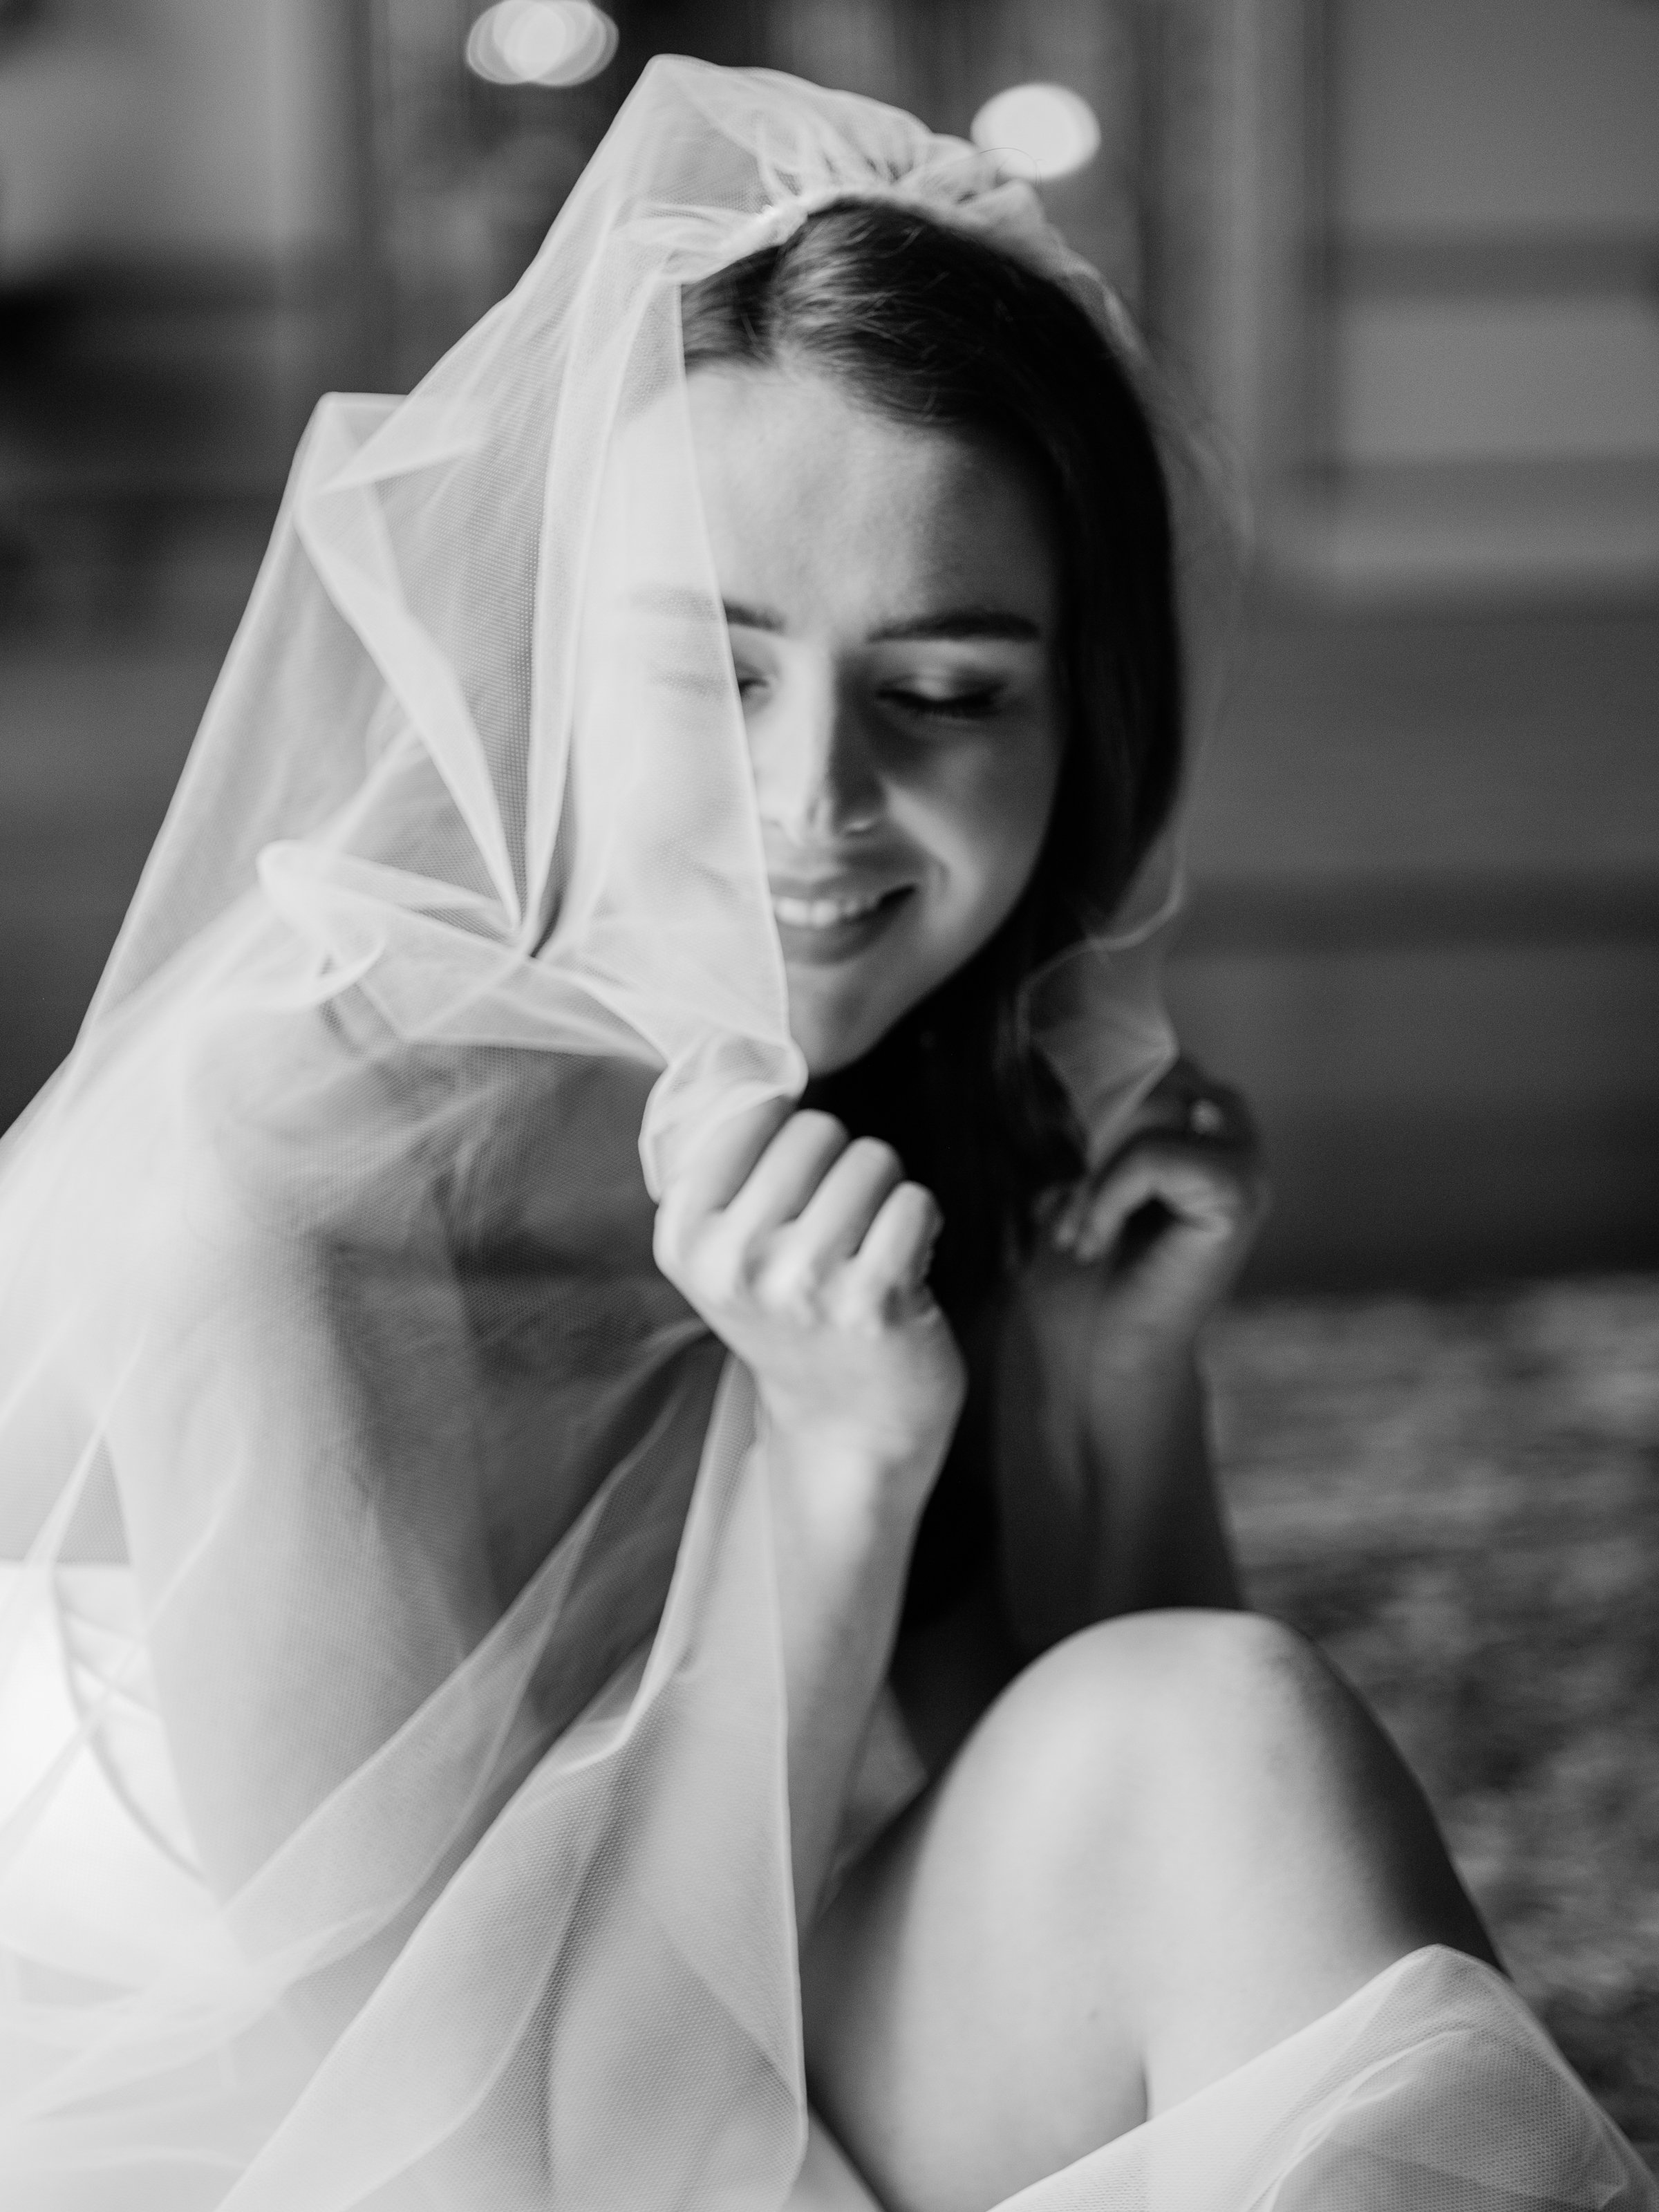 Bride with veil over face at Somerley House wedding venue